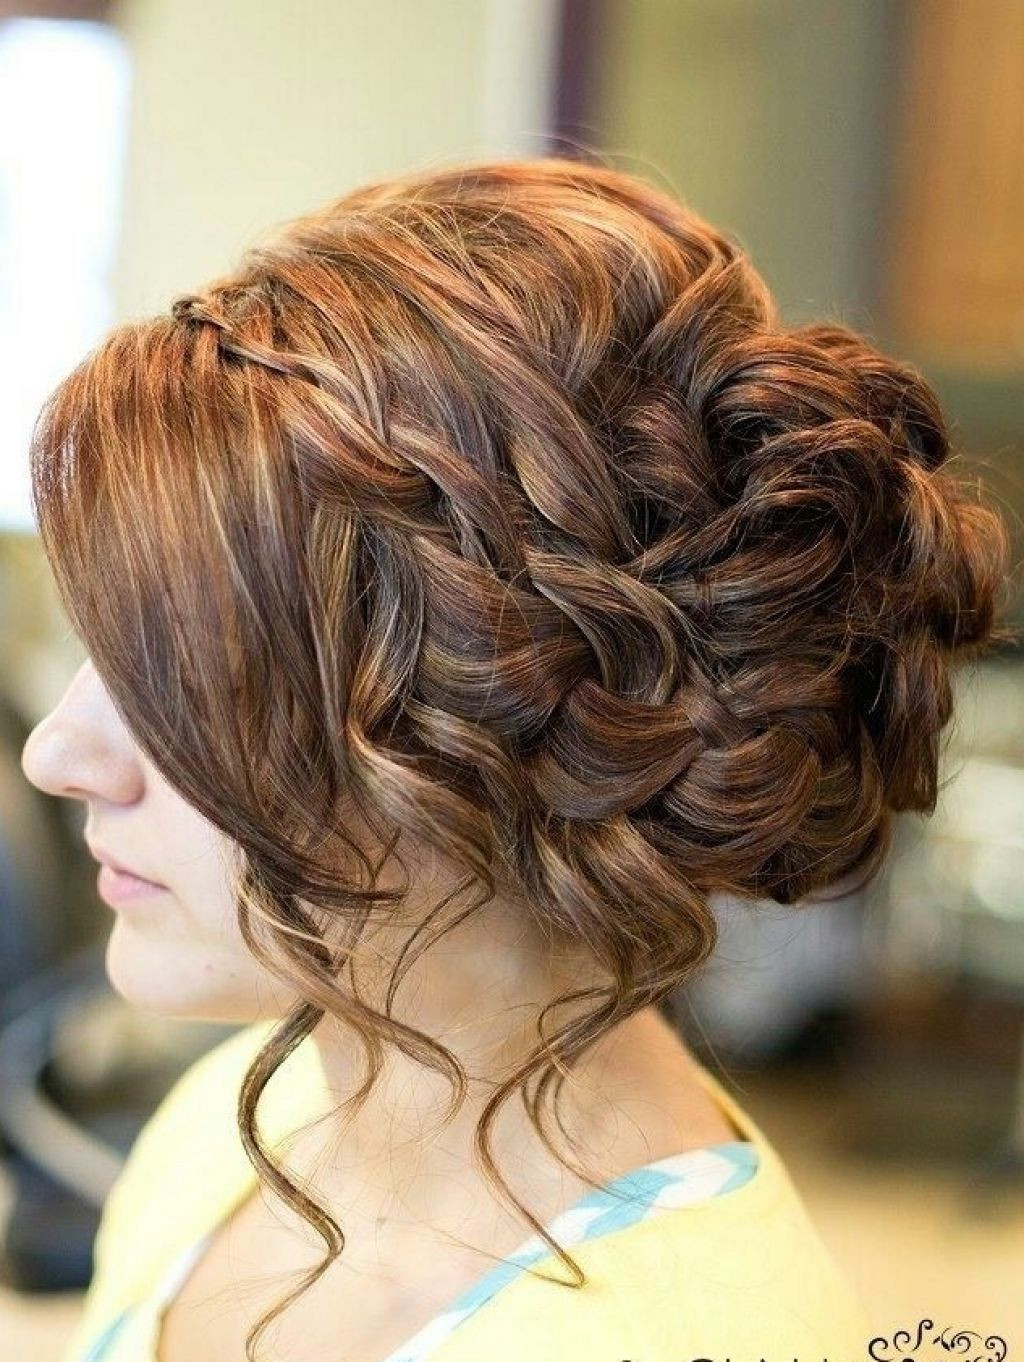 Homecoming Updo Hairstyles
 14 Prom Hairstyles for Long Hair that are Simply Adorable